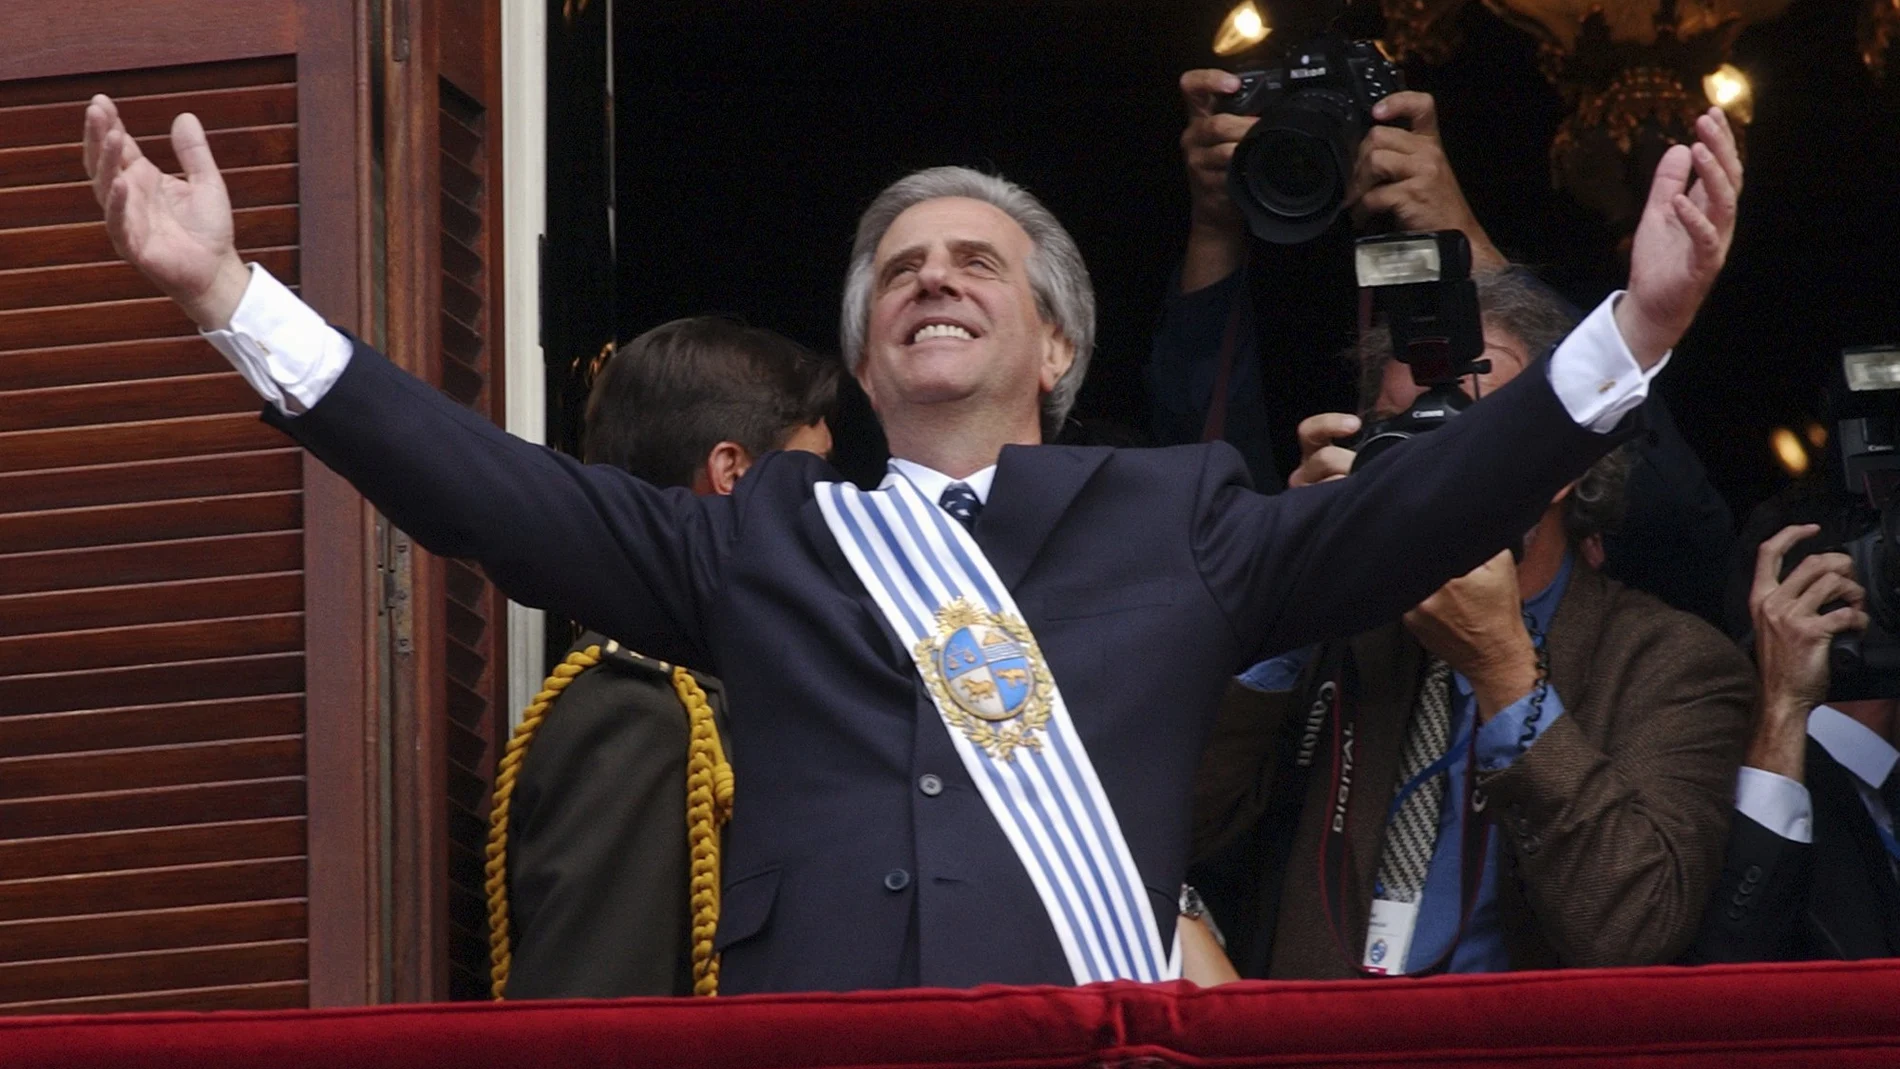 FILE - In this March 1, 2005 Uruguay's President Tabare Vazquez opens his arms to supporters from the balcony of the Government Palace in Montevideo, Uruguay. The former president died in Montevideo early Sunday, Dec. 6, 2020. He was 80-years-old. (AP Photo/Marcelo Hernandez, File)